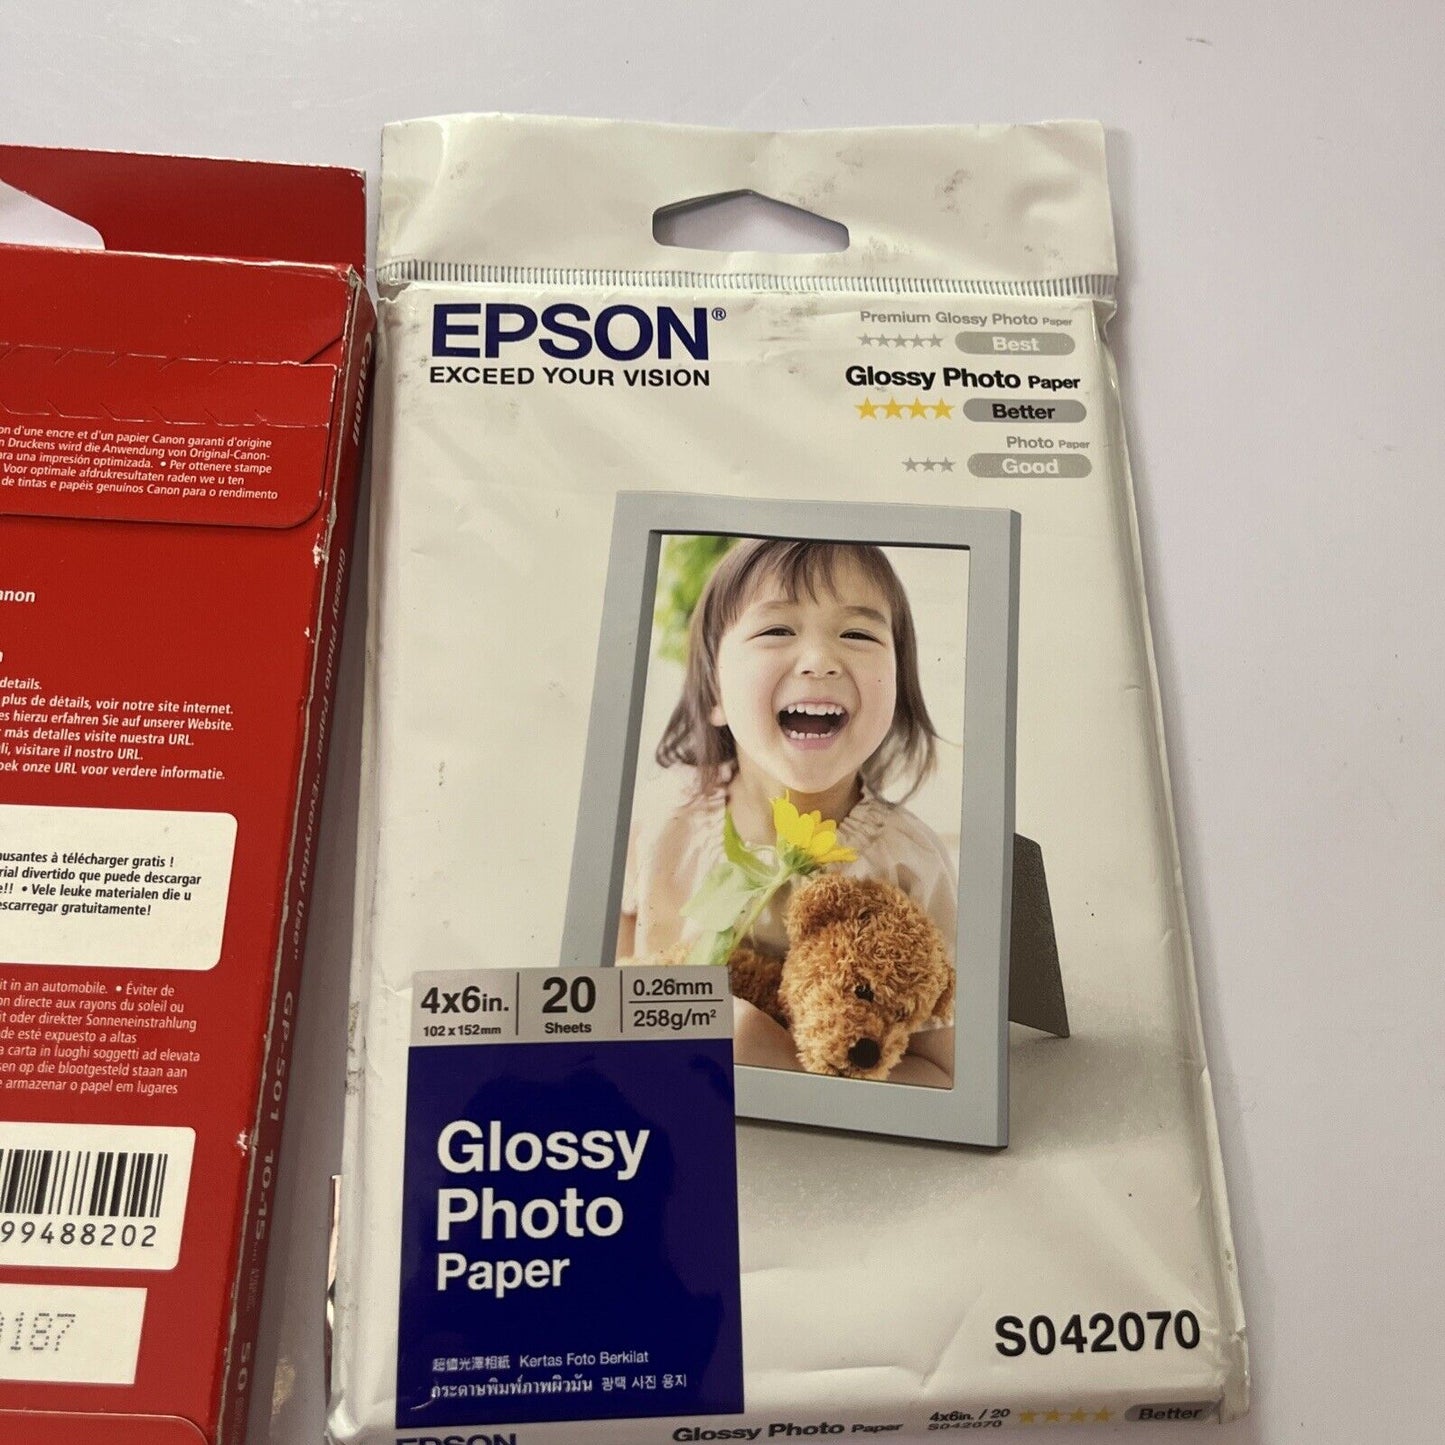 Canon GP501 50 Sheets & Epson 4x6" Glossy Photo Paper 170GSM